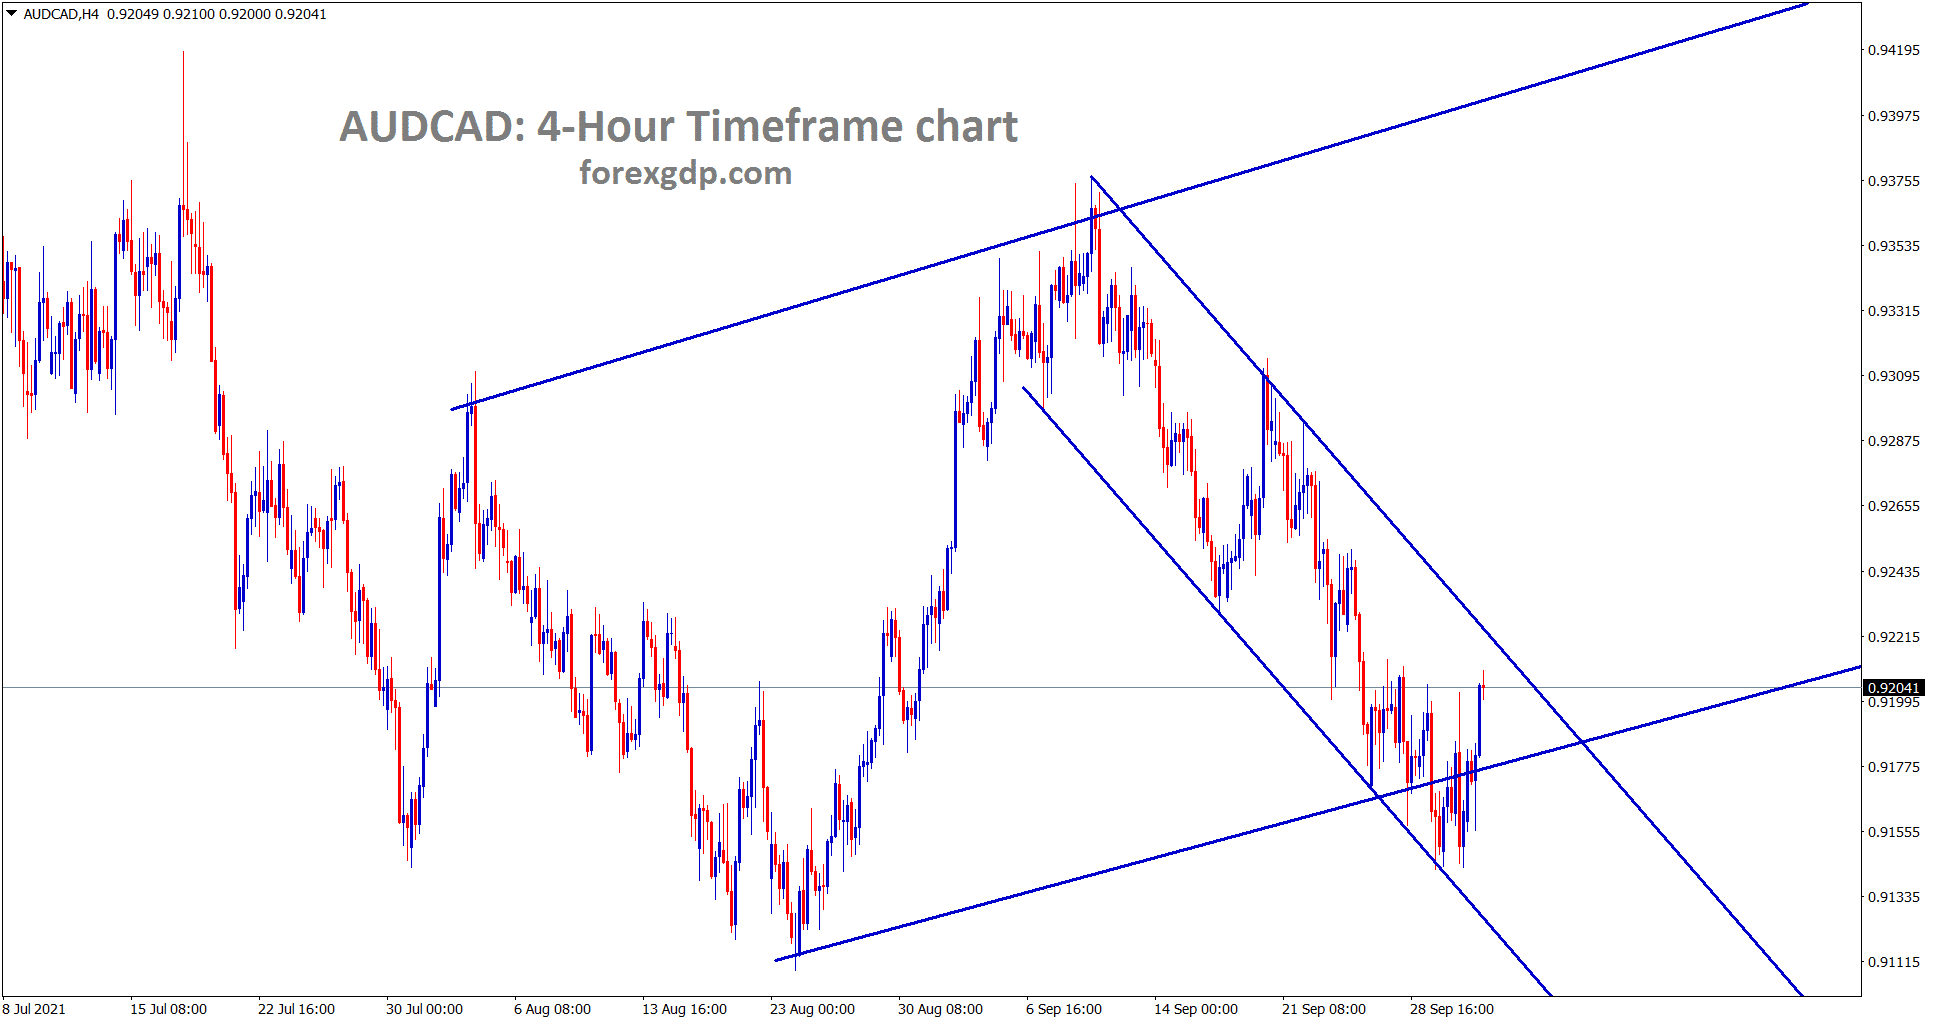 AUDCAD is clearly moving in a descending channel and also rebounding from the higher low